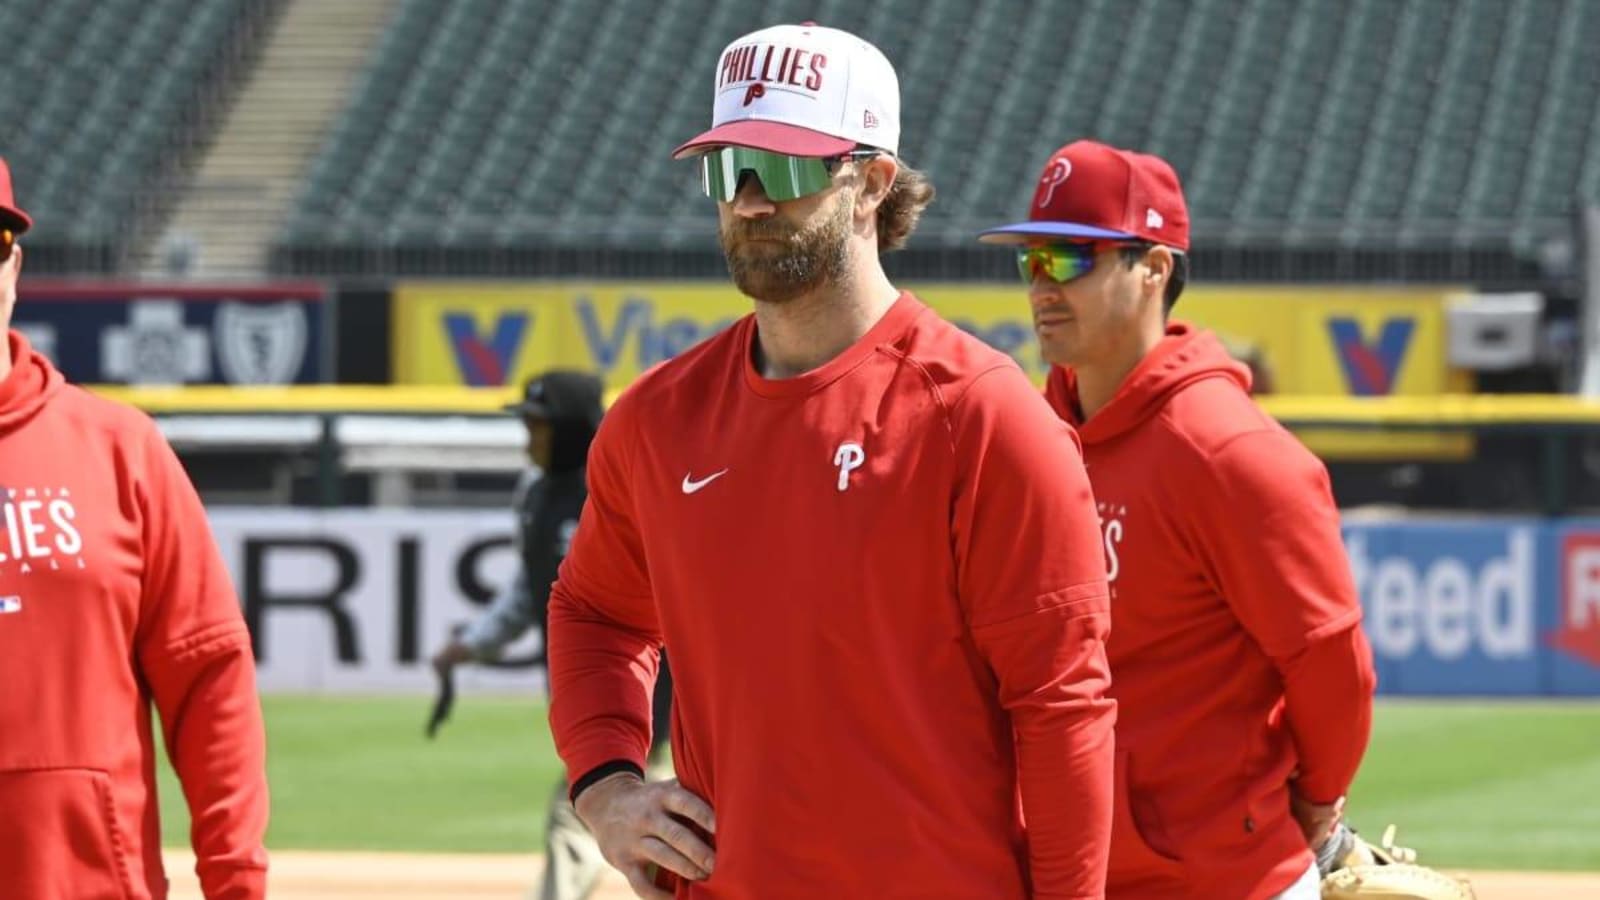 The Phillies red jerseys are returning this week